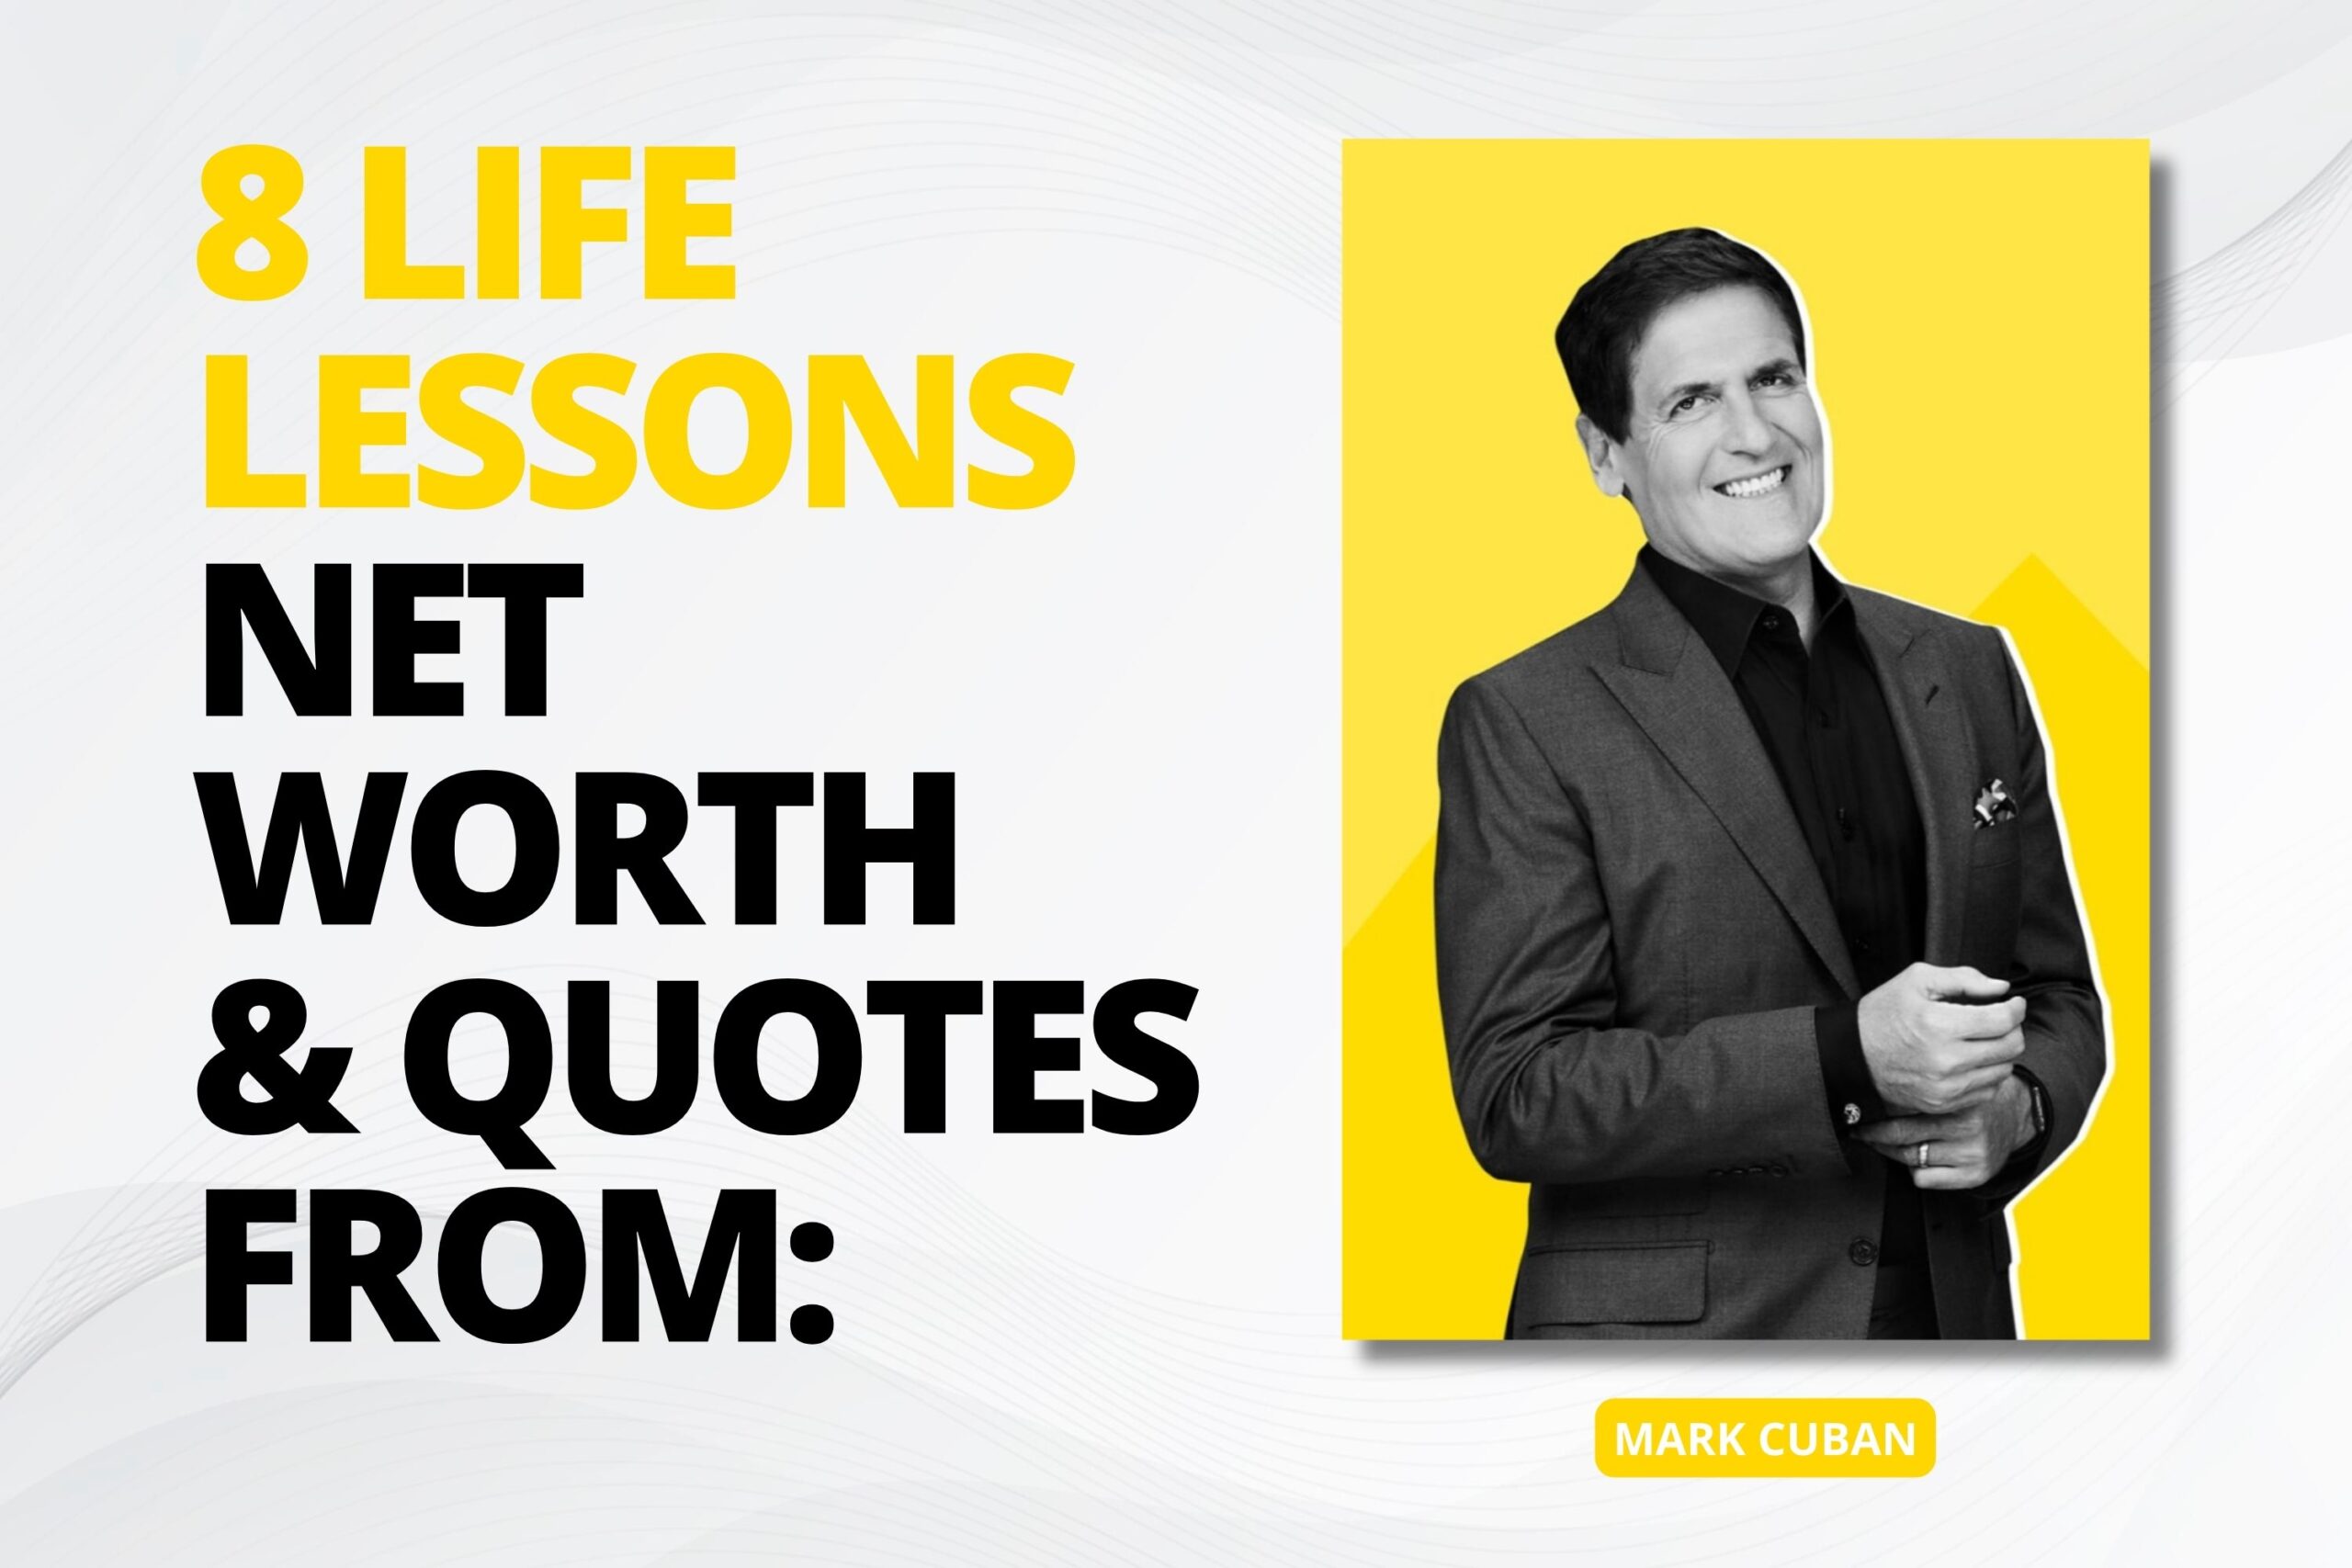 Mark Cuban Net worth, Quotes & 8 Influential Life Lessons